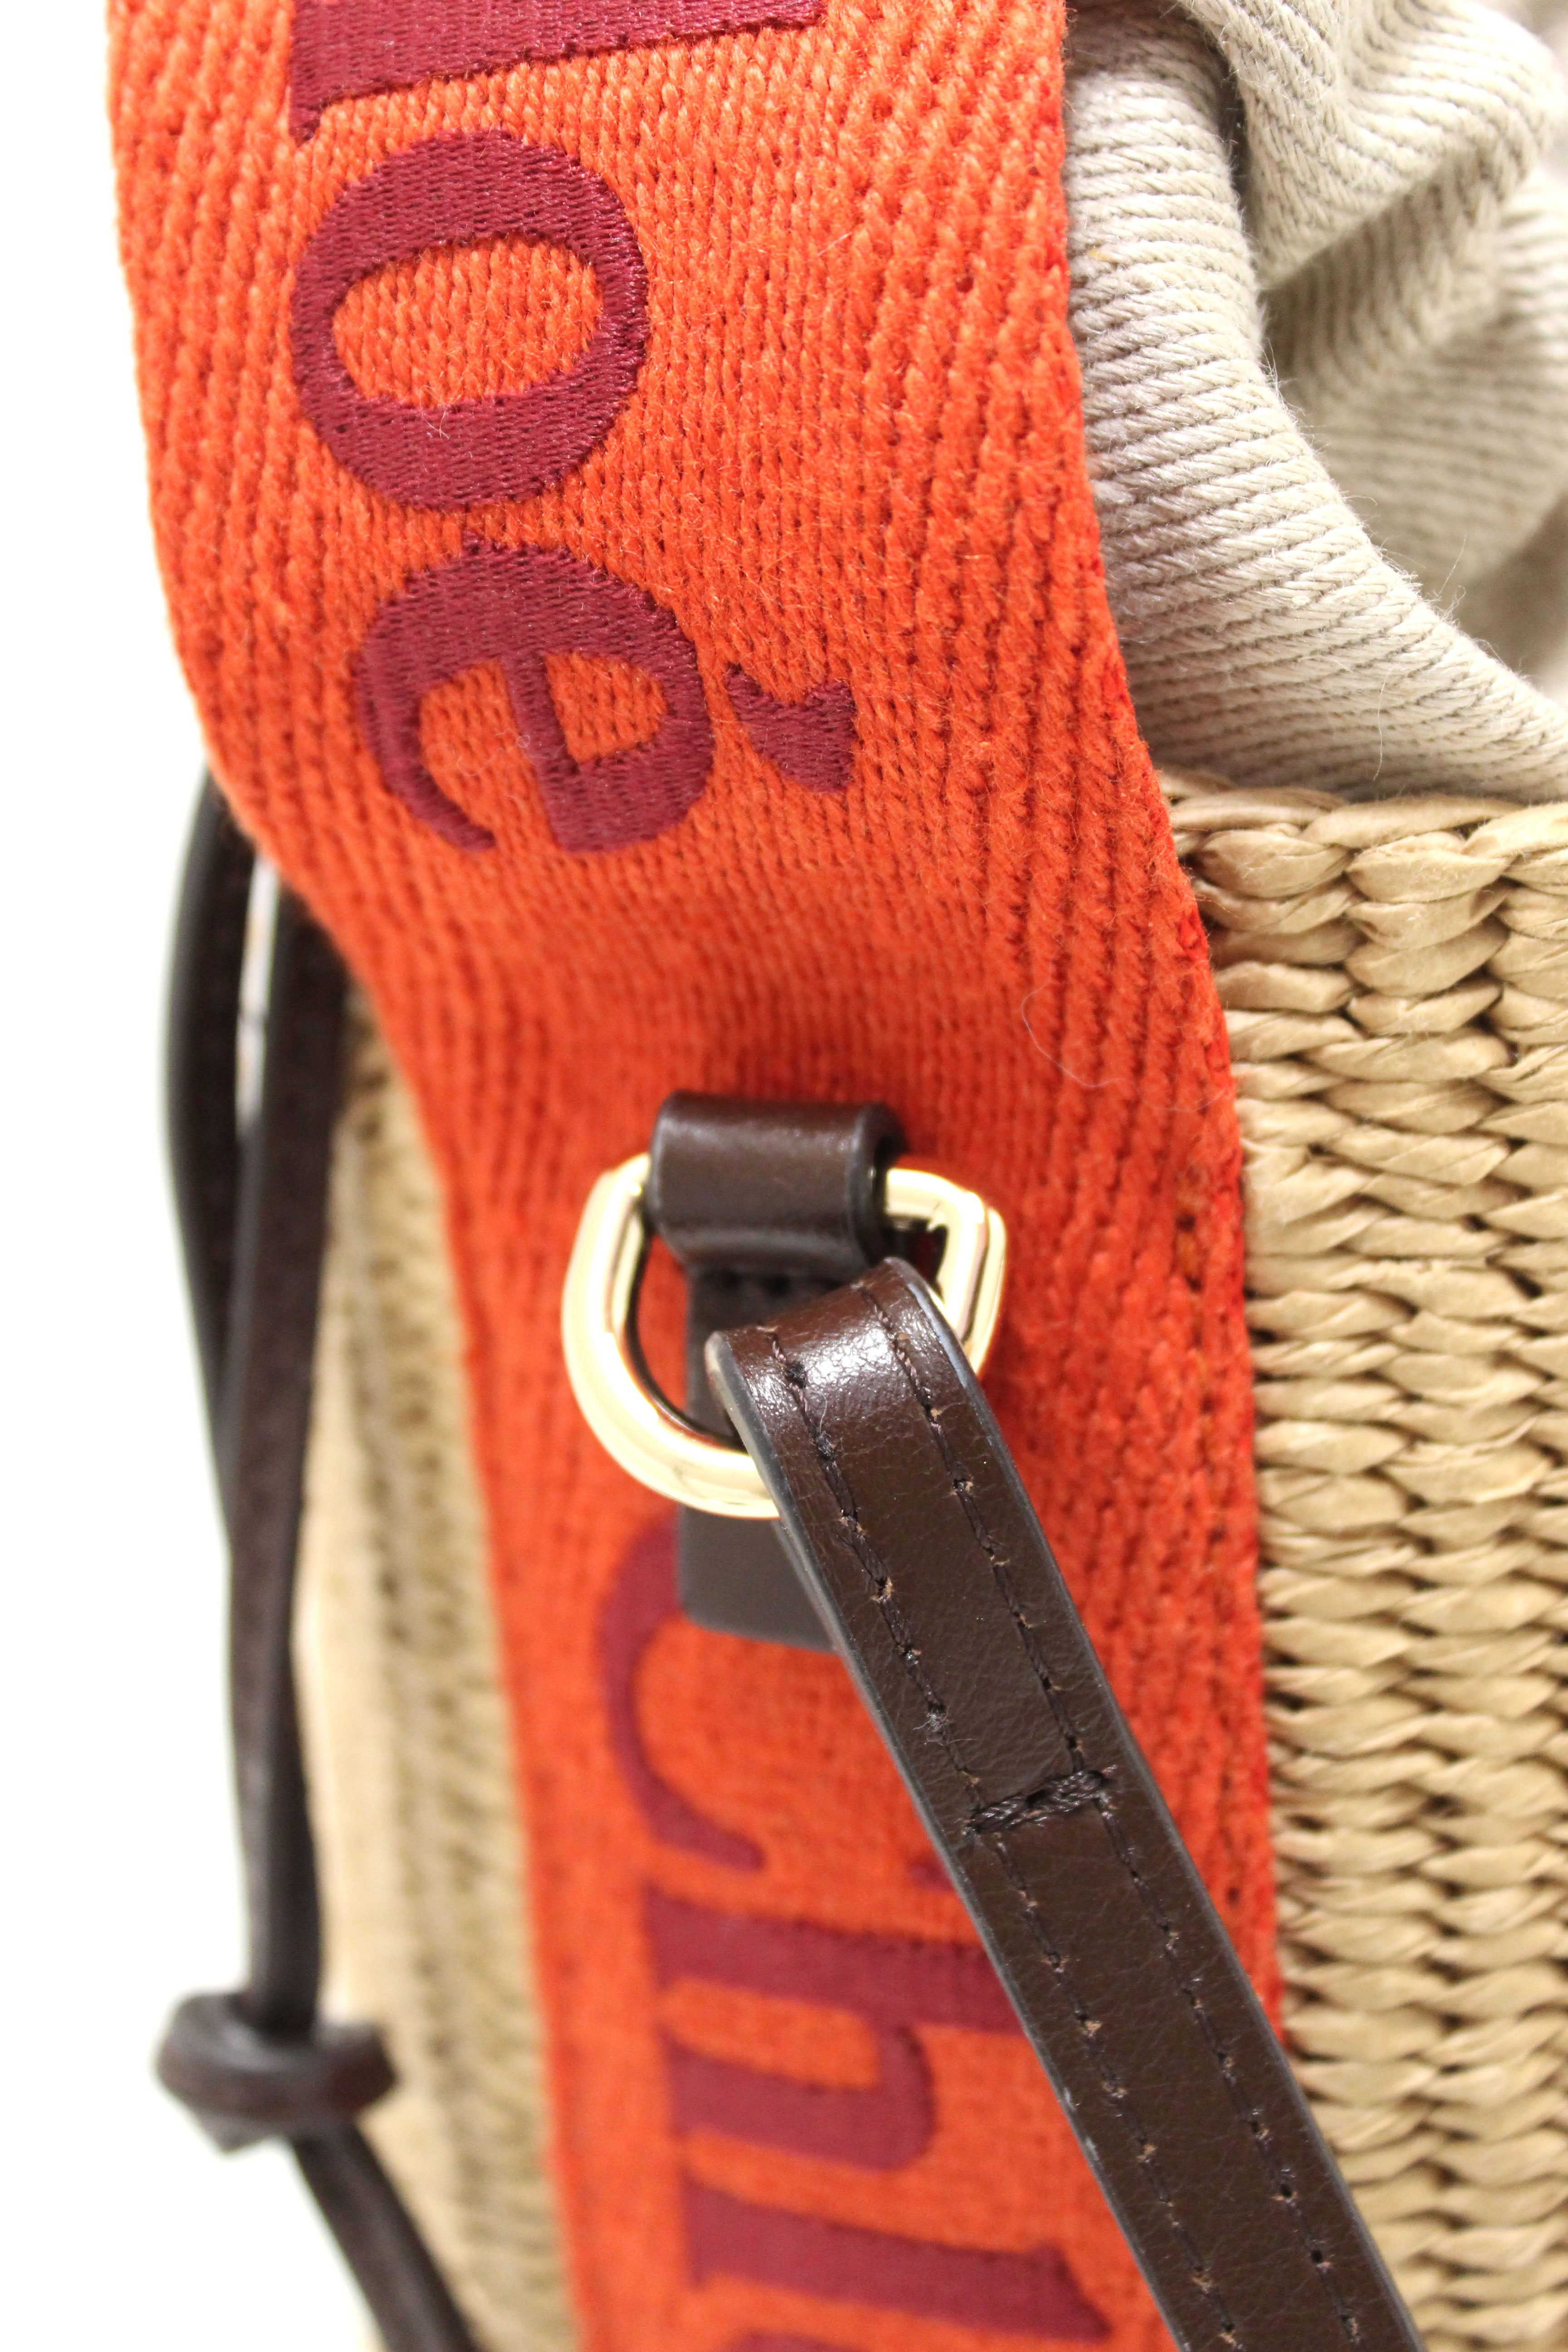 Authentic Chloé Woody Woven with Orange Logo Strap Tops Basket Bag